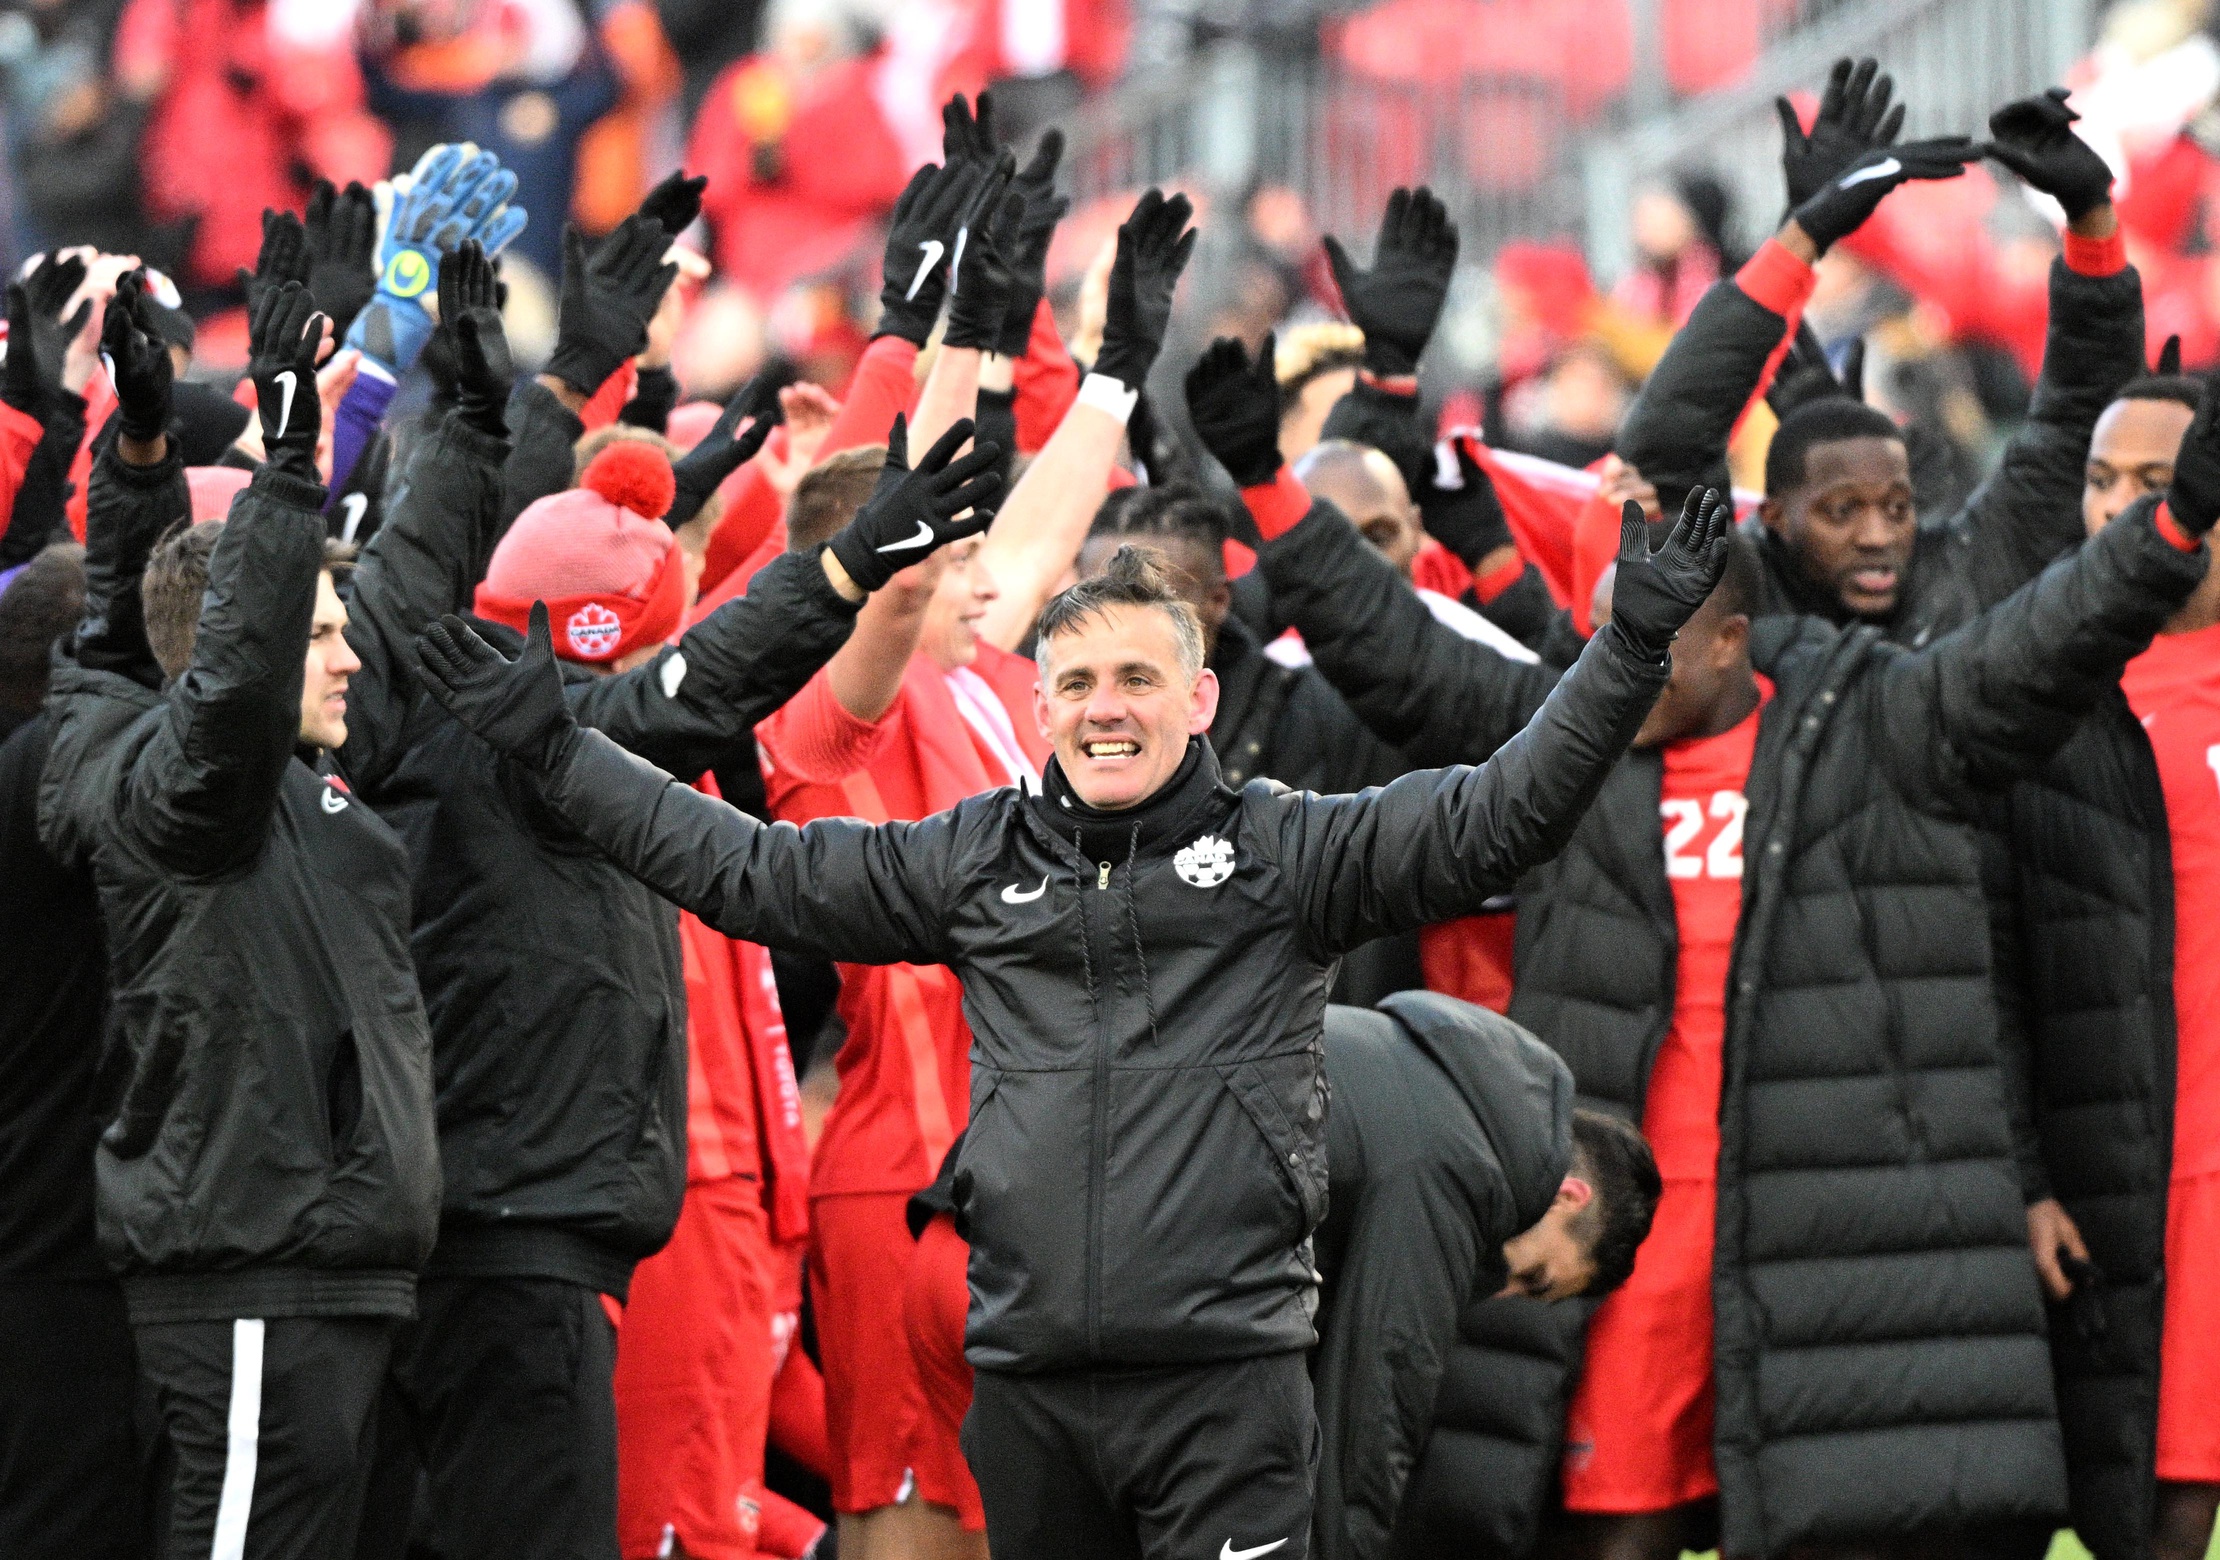 Soccer: FIFA World Cup Qualifier-Jamaica at Canada, John Herdman leading the Viking Clap on March 27, 2023